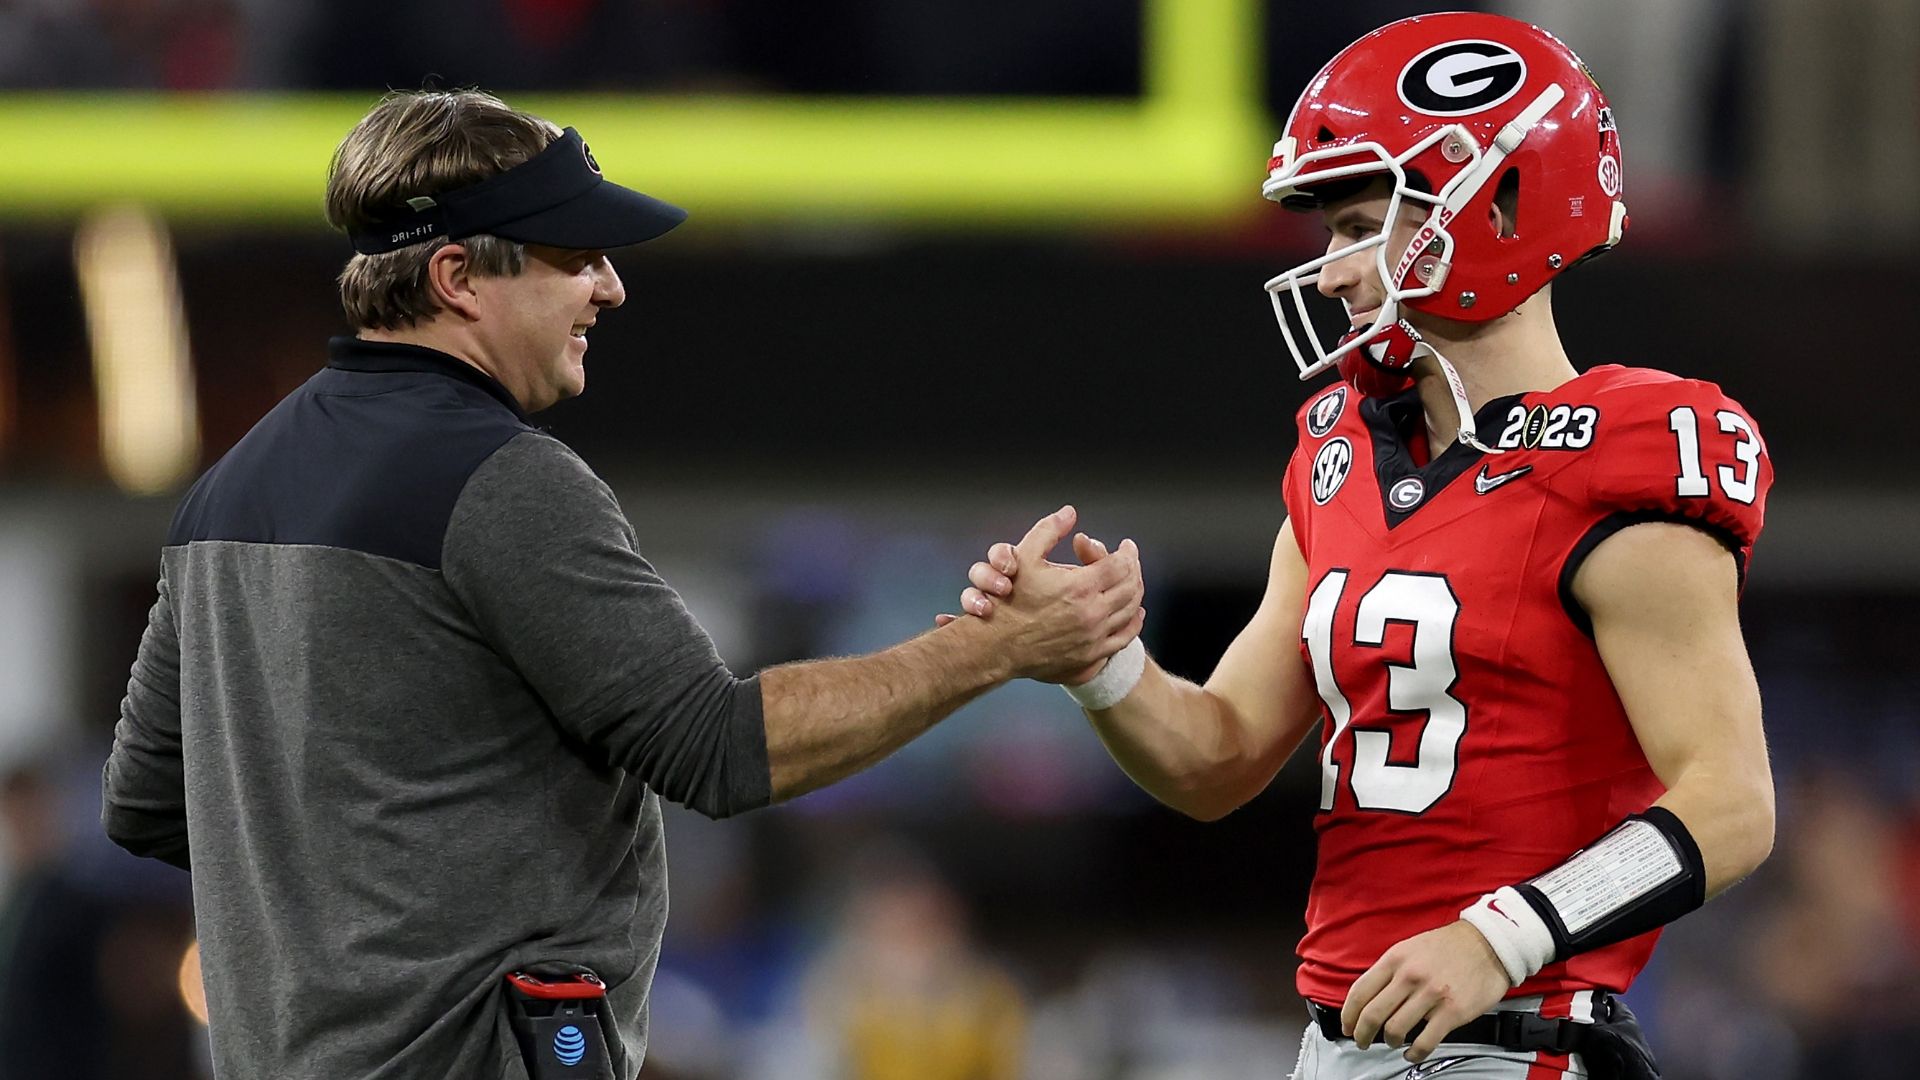 Georgia's Kirby: 'There is no next Stetson Bennett'